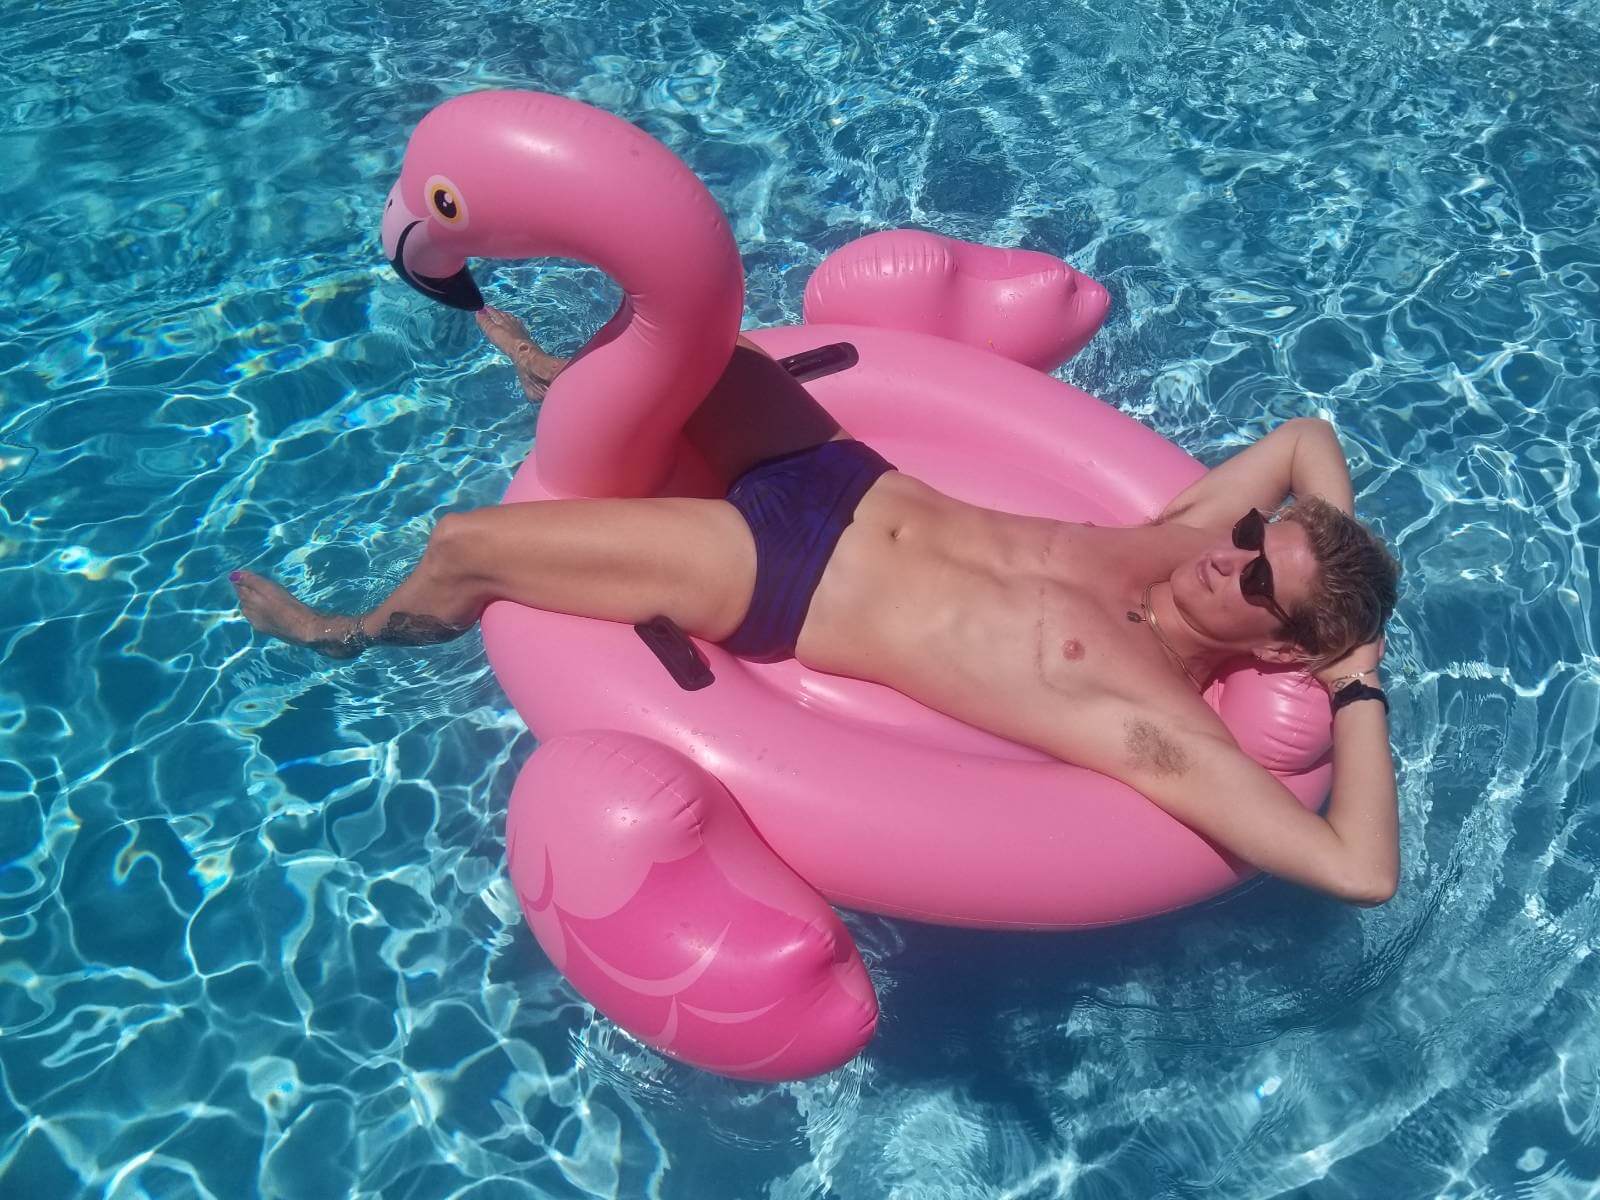 K.R. Rose looking cool on the inflatable flamingo.